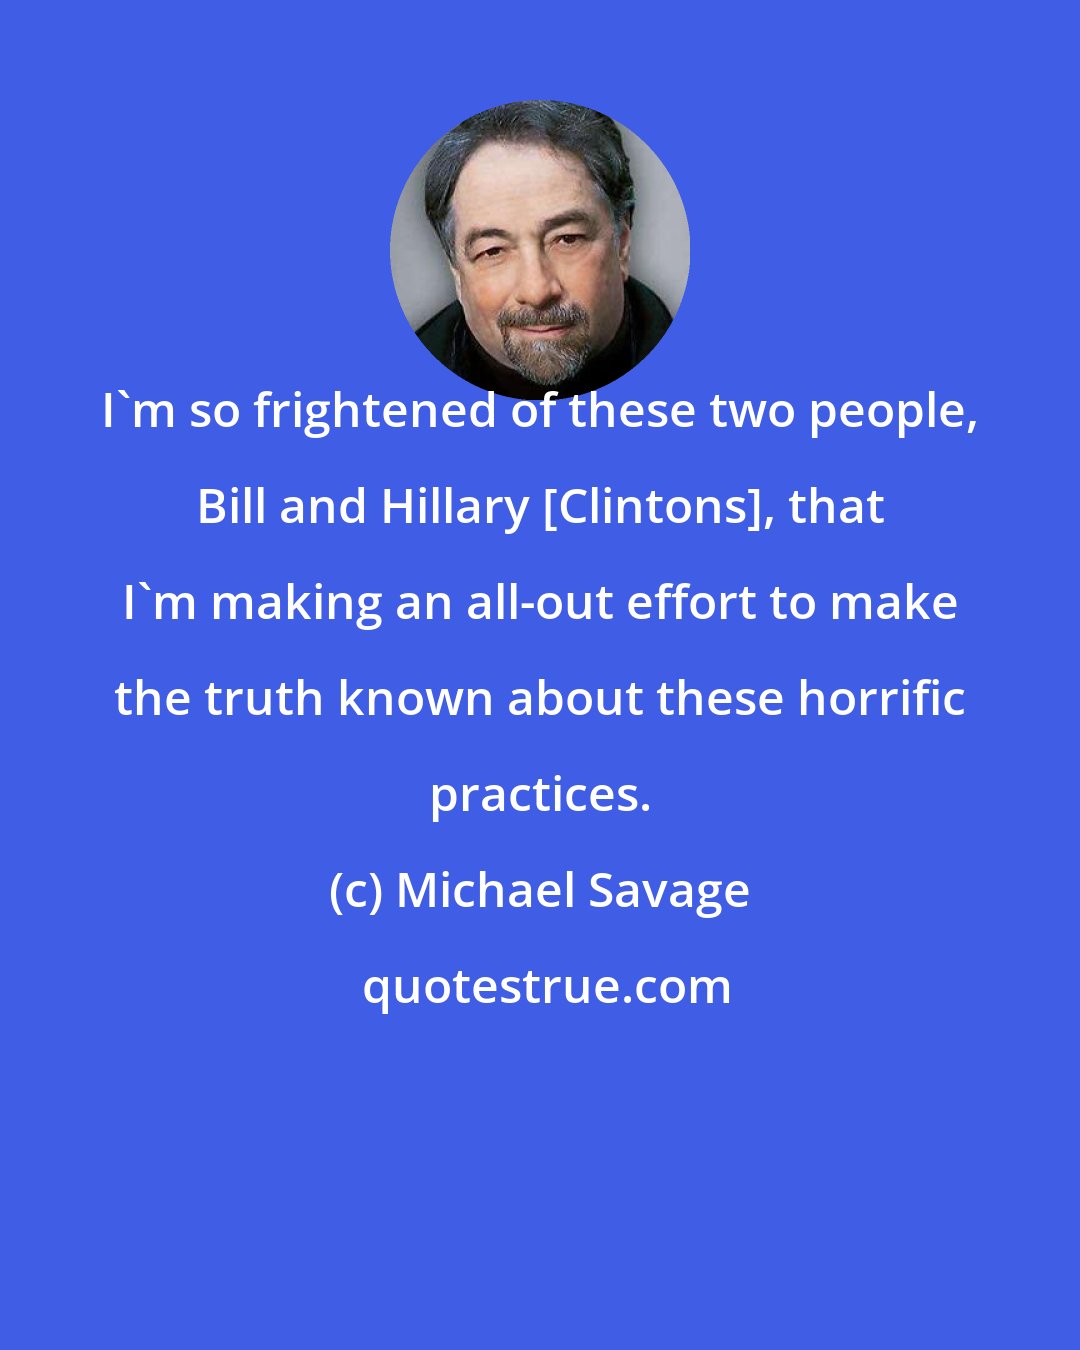 Michael Savage: I'm so frightened of these two people, Bill and Hillary [Clintons], that I'm making an all-out effort to make the truth known about these horrific practices.